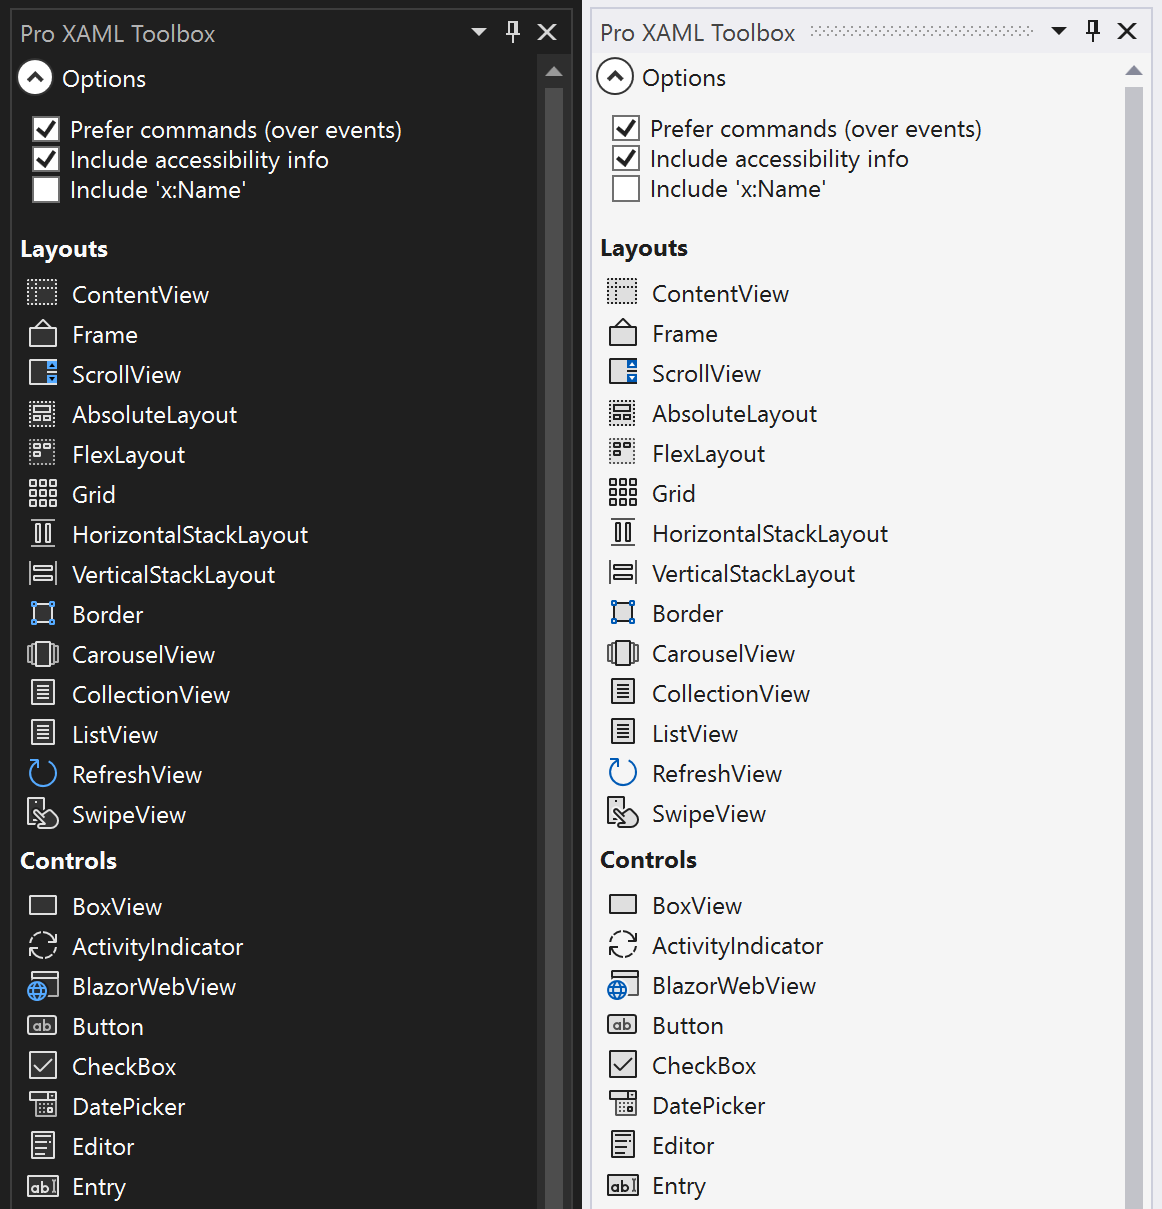 Screenshot showing the Pro XAML Toolbox in light and dark themes